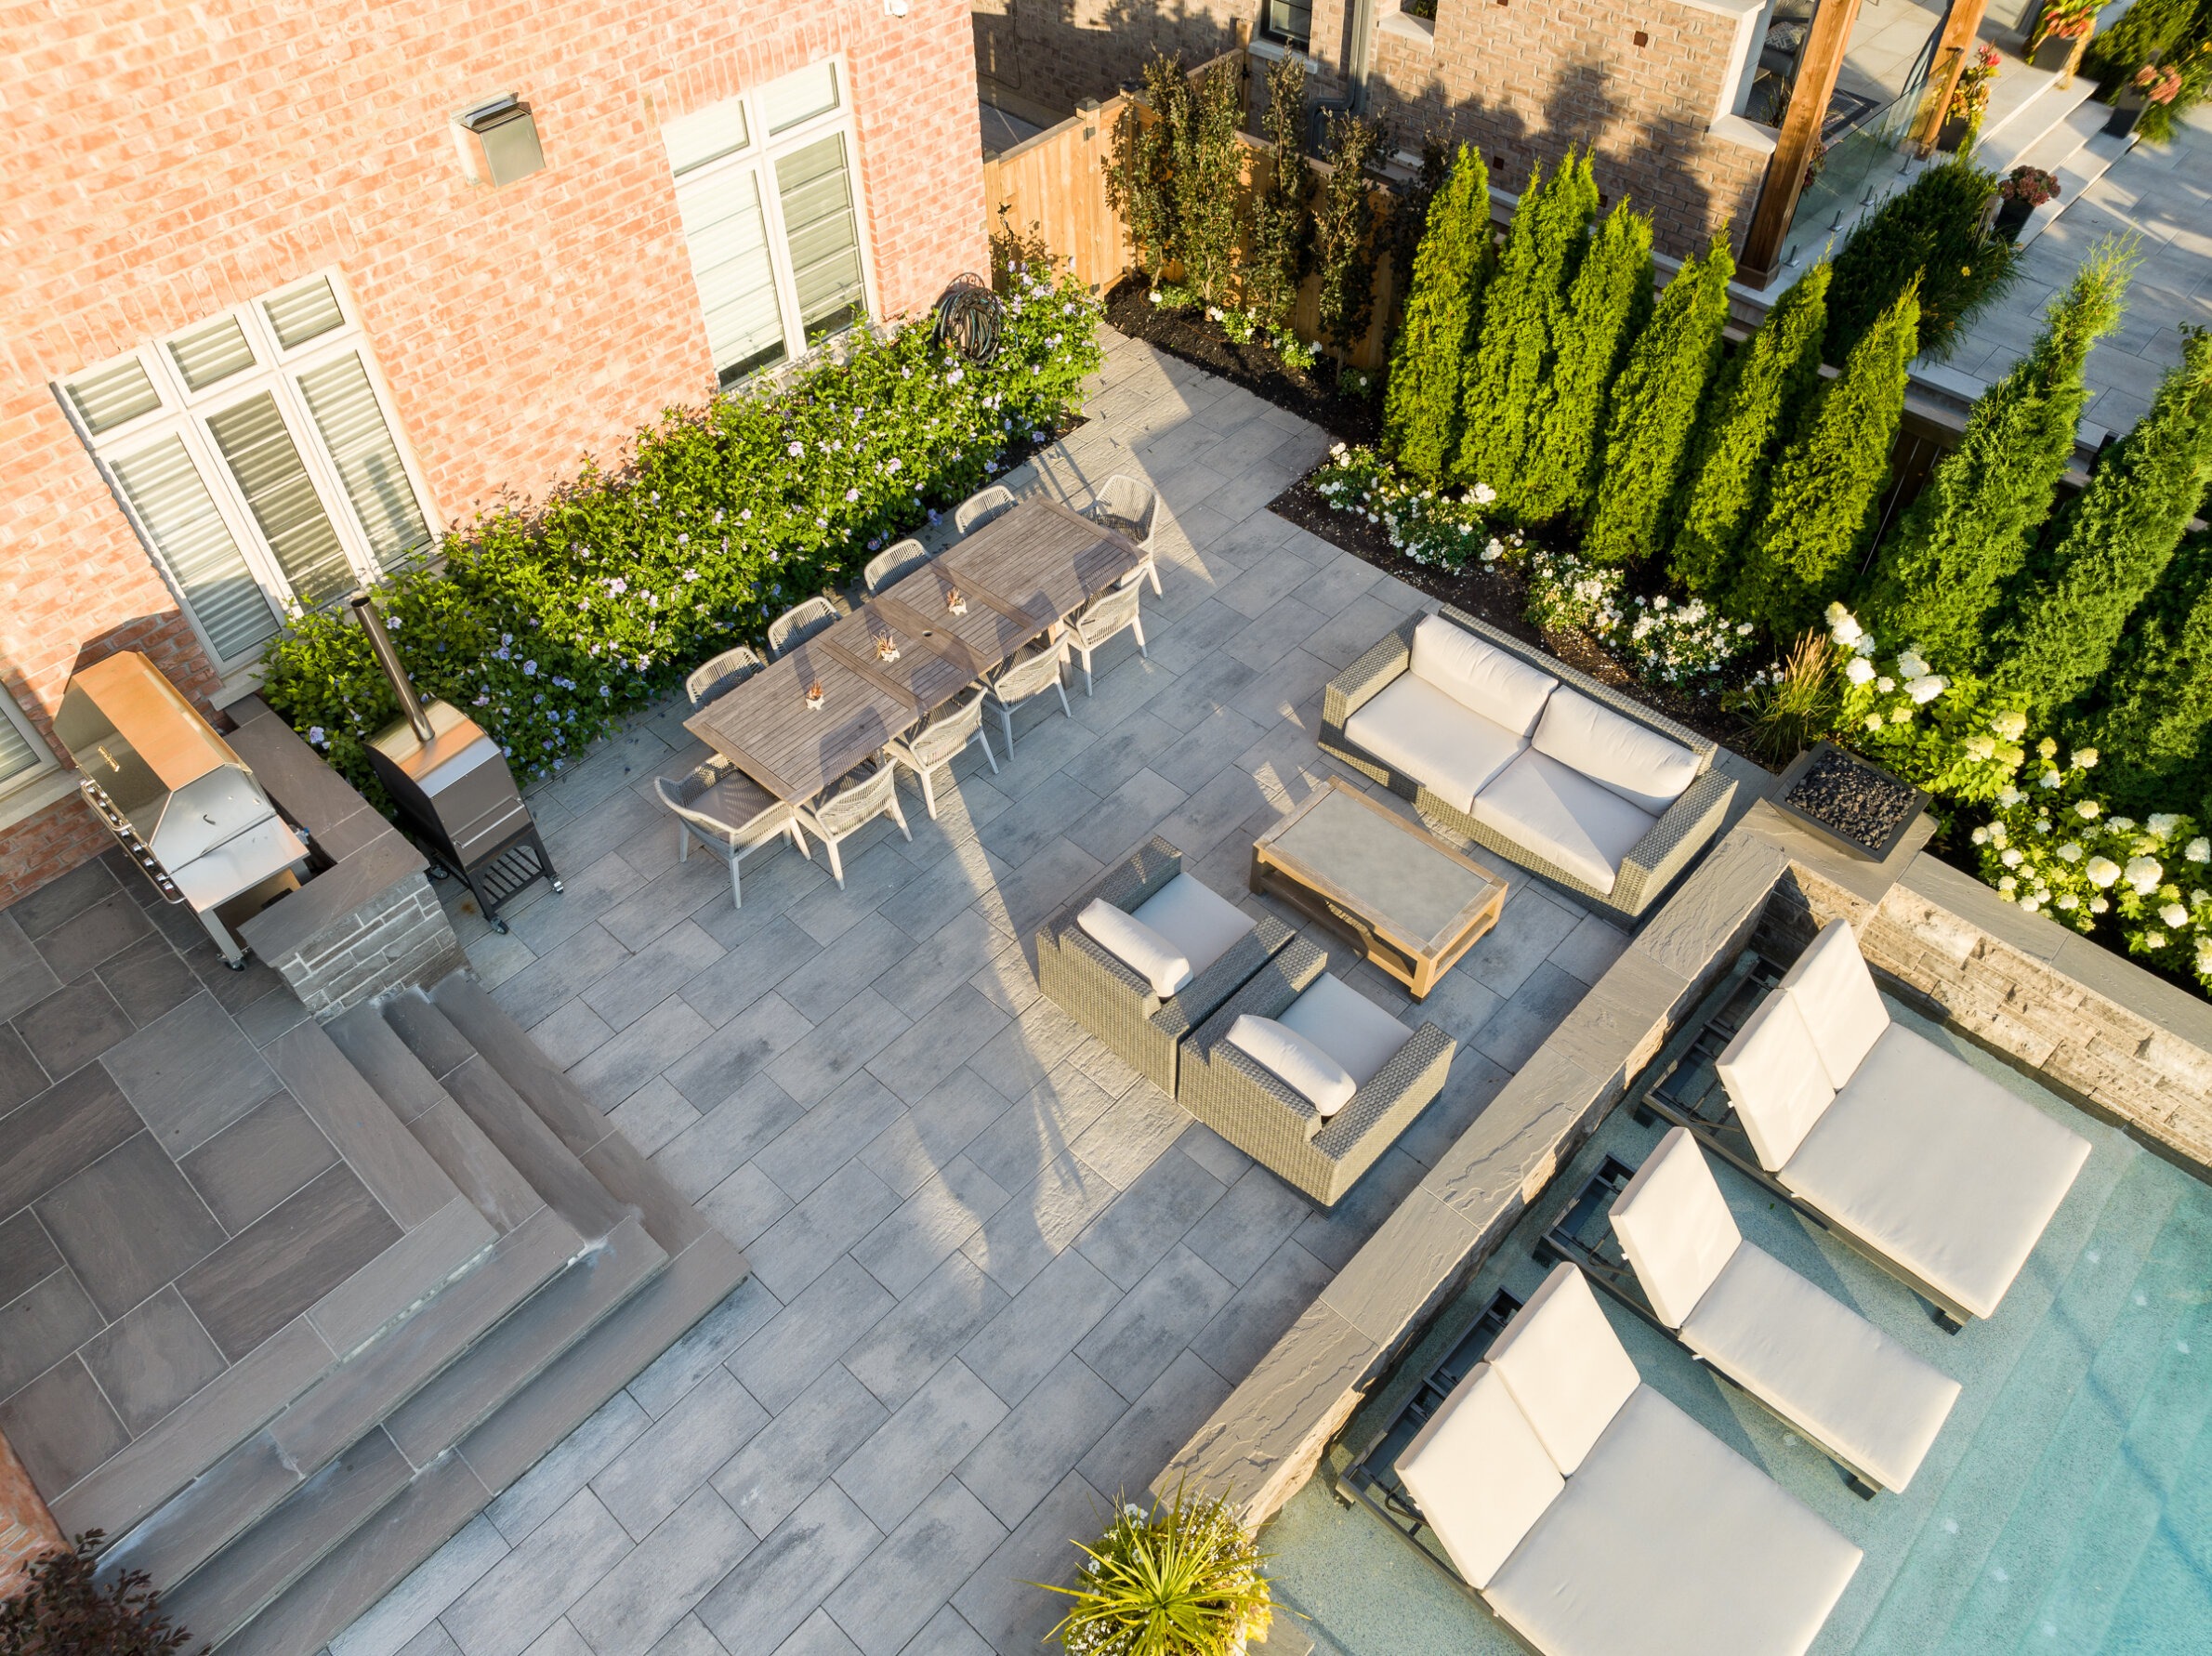 Aerial view of a stylish outdoor patio with dining furniture, lounge chairs, neatly landscaped plants, and a pool in a residential area.